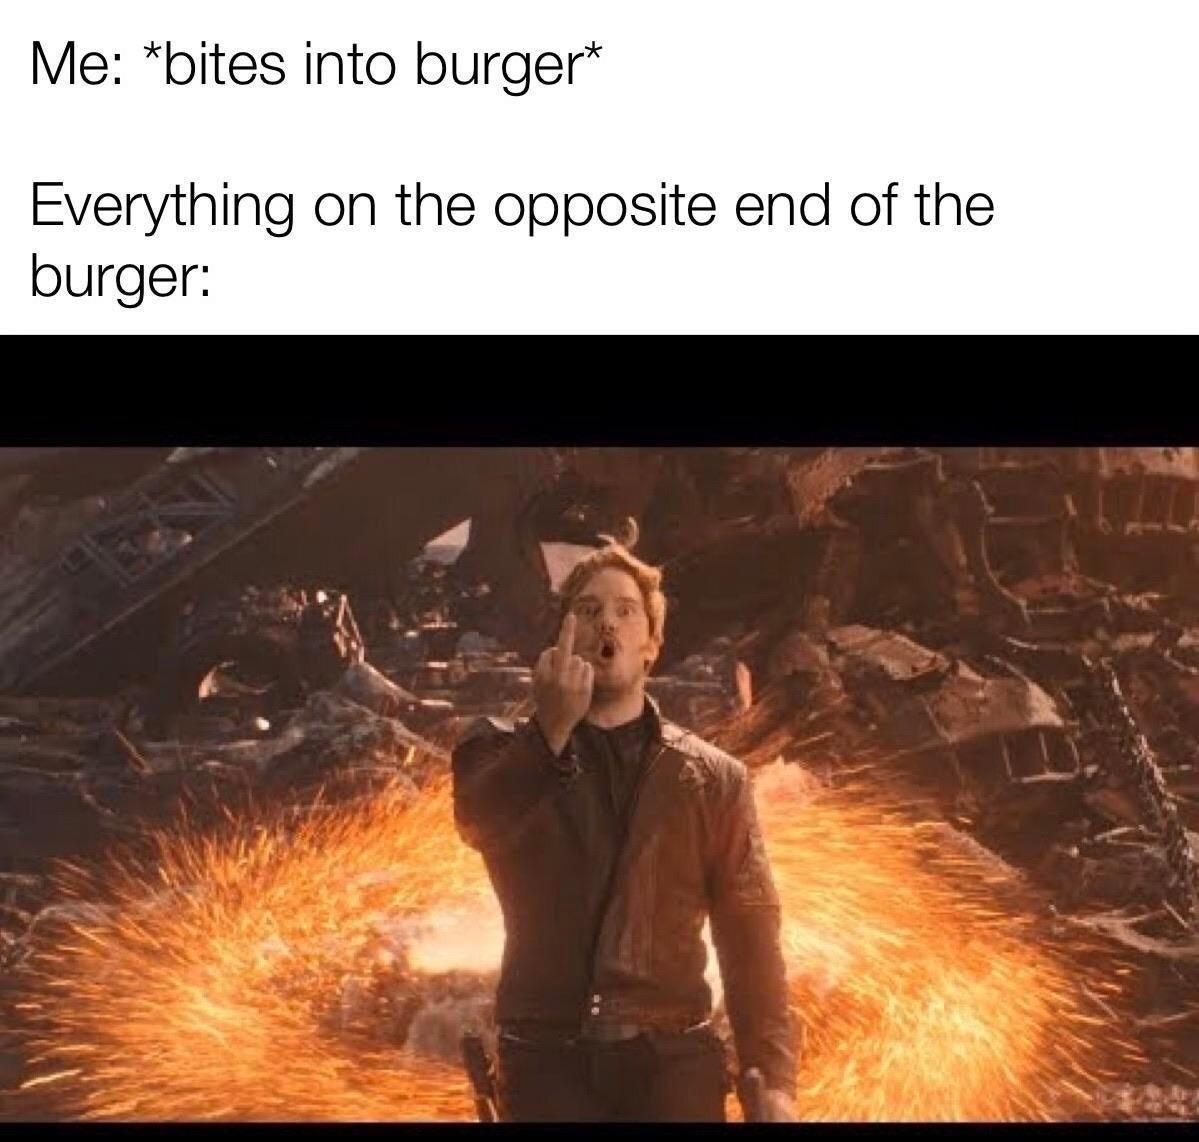 star lord boom - Me bites into burger Everything on the opposite end of the burger